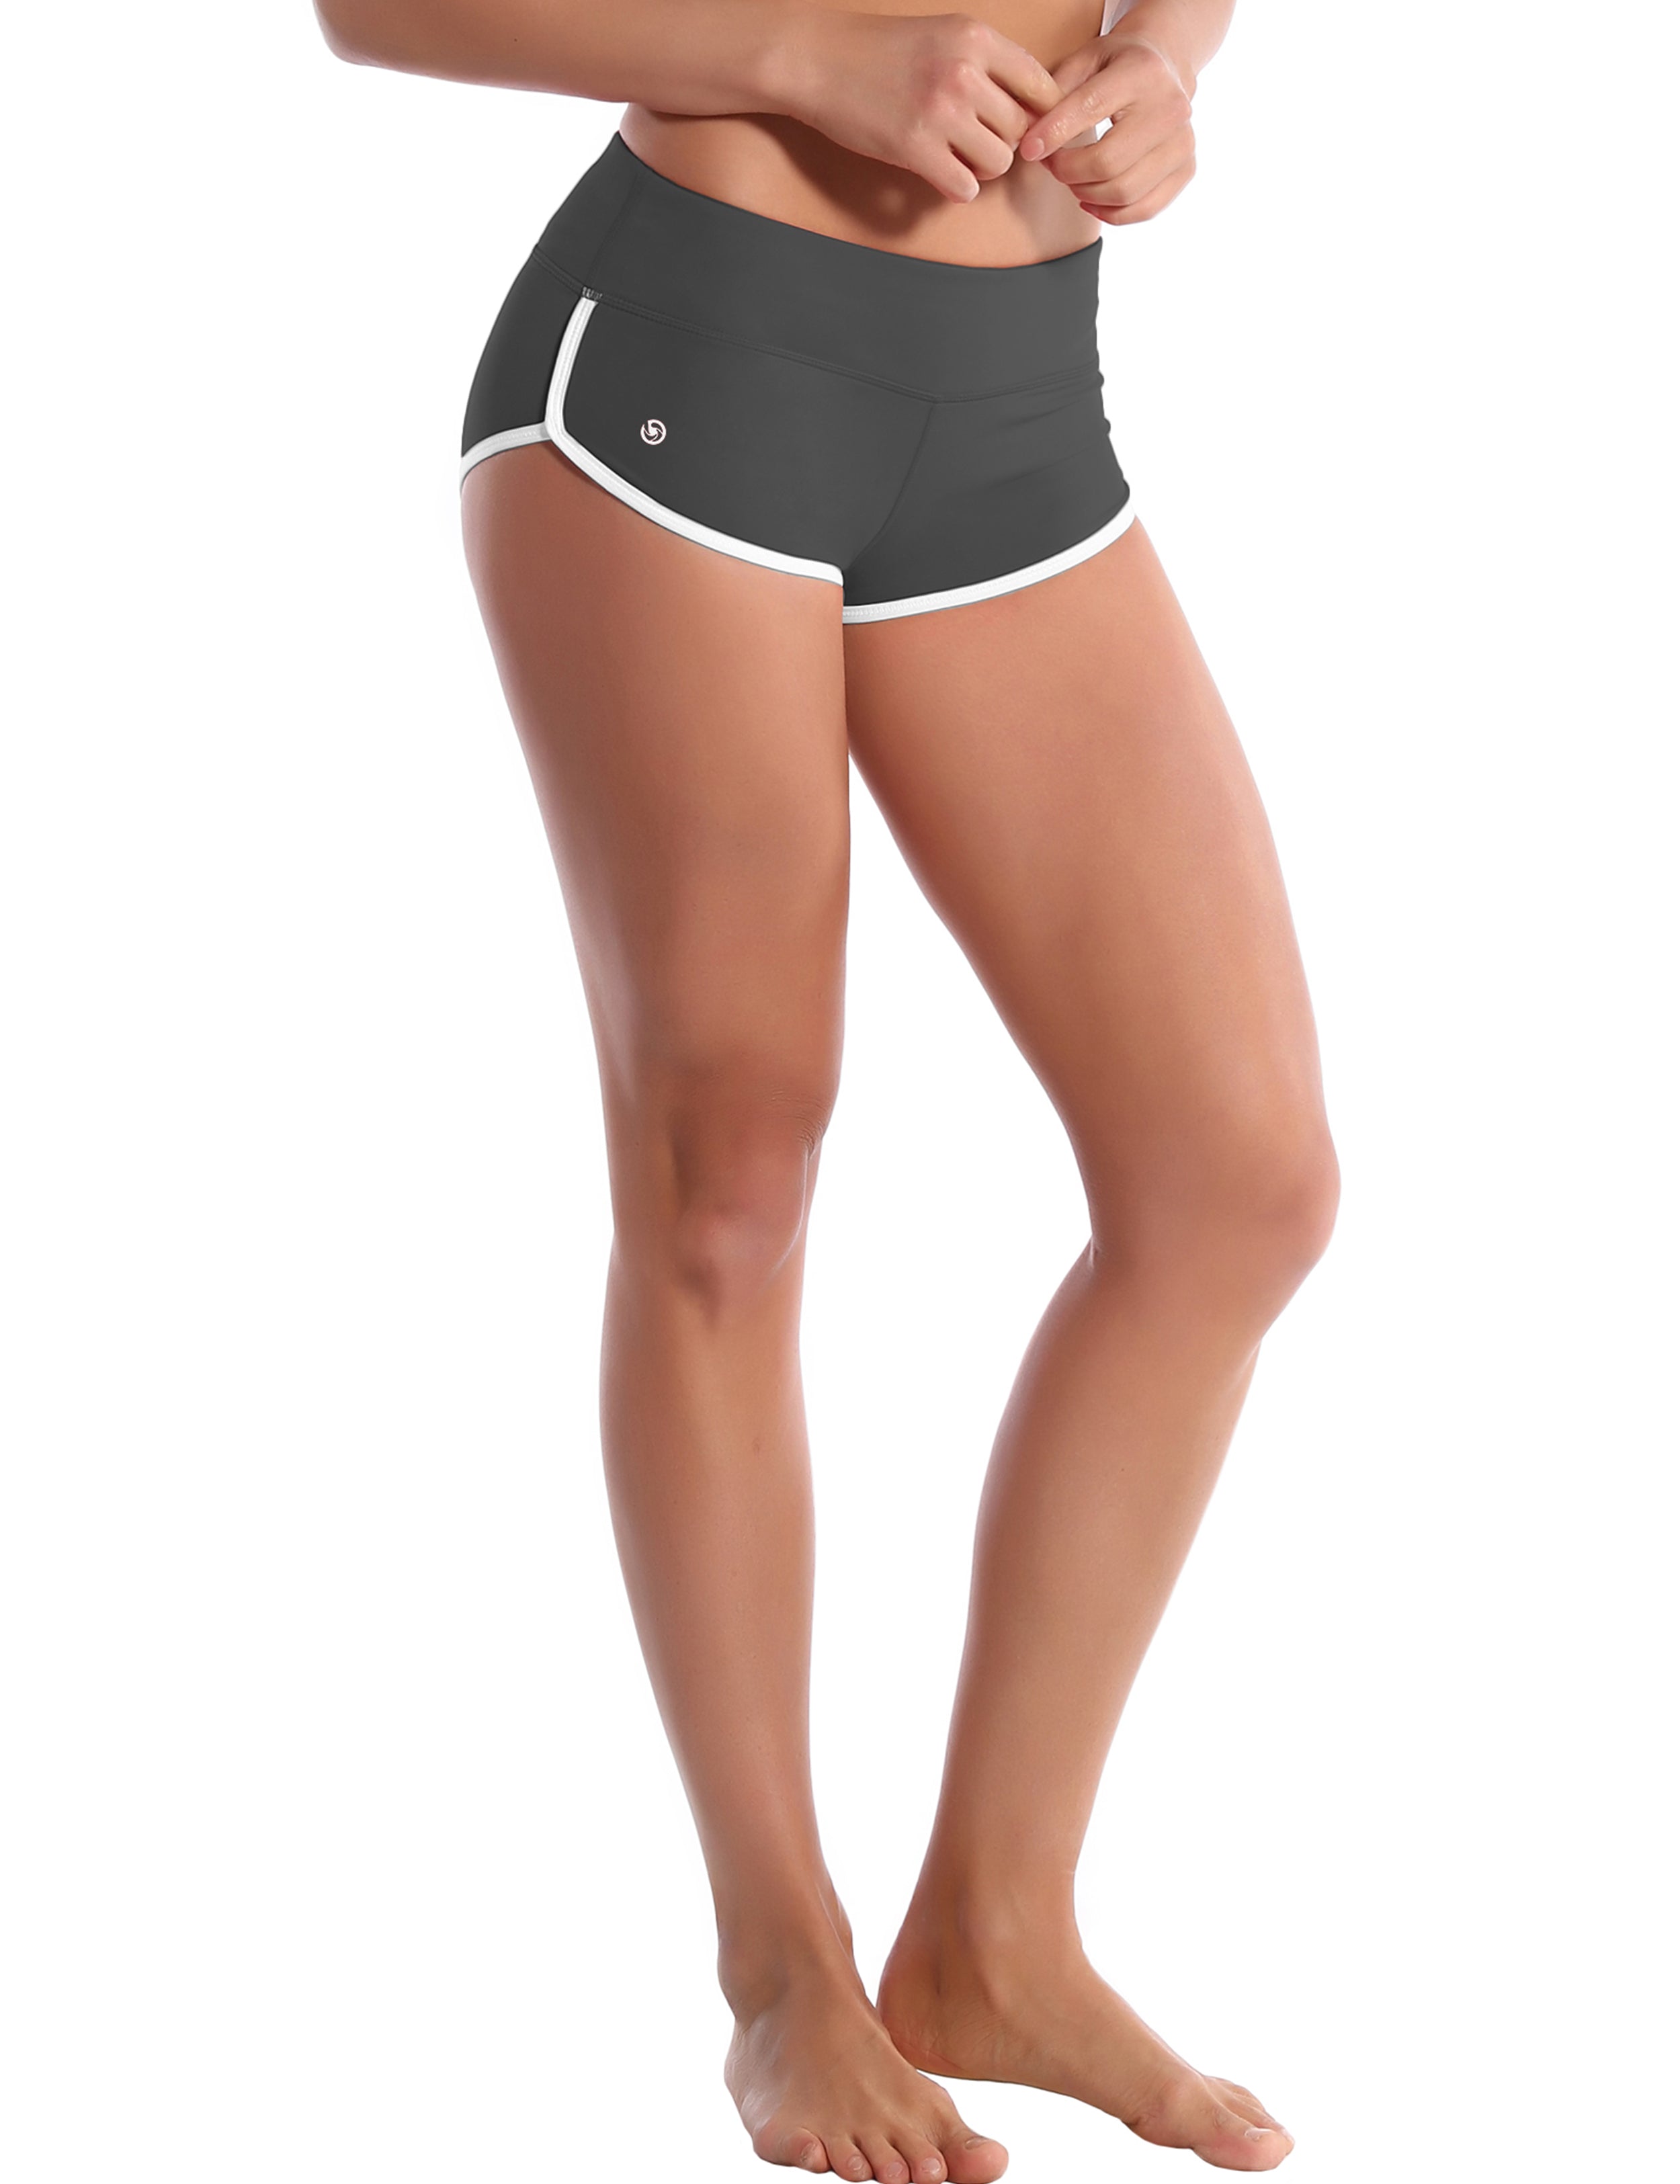 Sexy Booty Yoga Shorts shadowcharcoal Sleek, soft, smooth and totally comfortable: our newest sexy style is here. Softest-ever fabric High elasticity High density 4-way stretch Fabric doesn't attract lint easily No see-through Moisture-wicking Machine wash 75%Nylon/25%Spandex